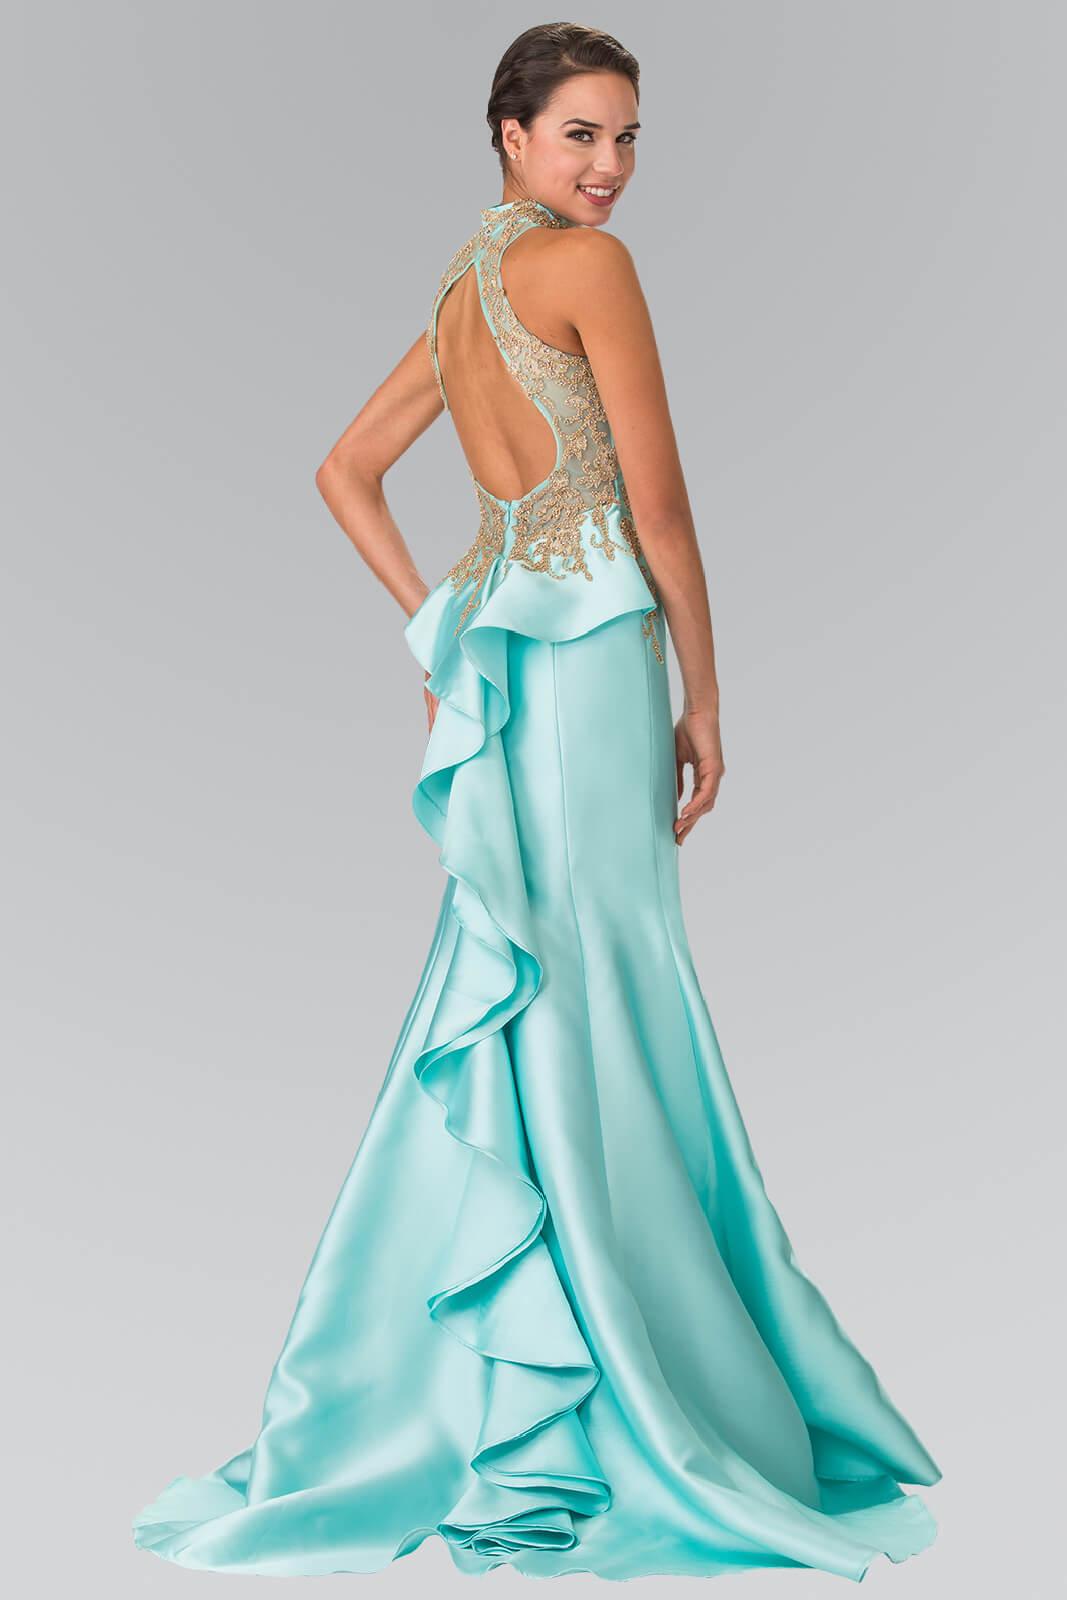 Homecoming Prom Long Formal Evening Gown - The Dress Outlet Elizabeth K